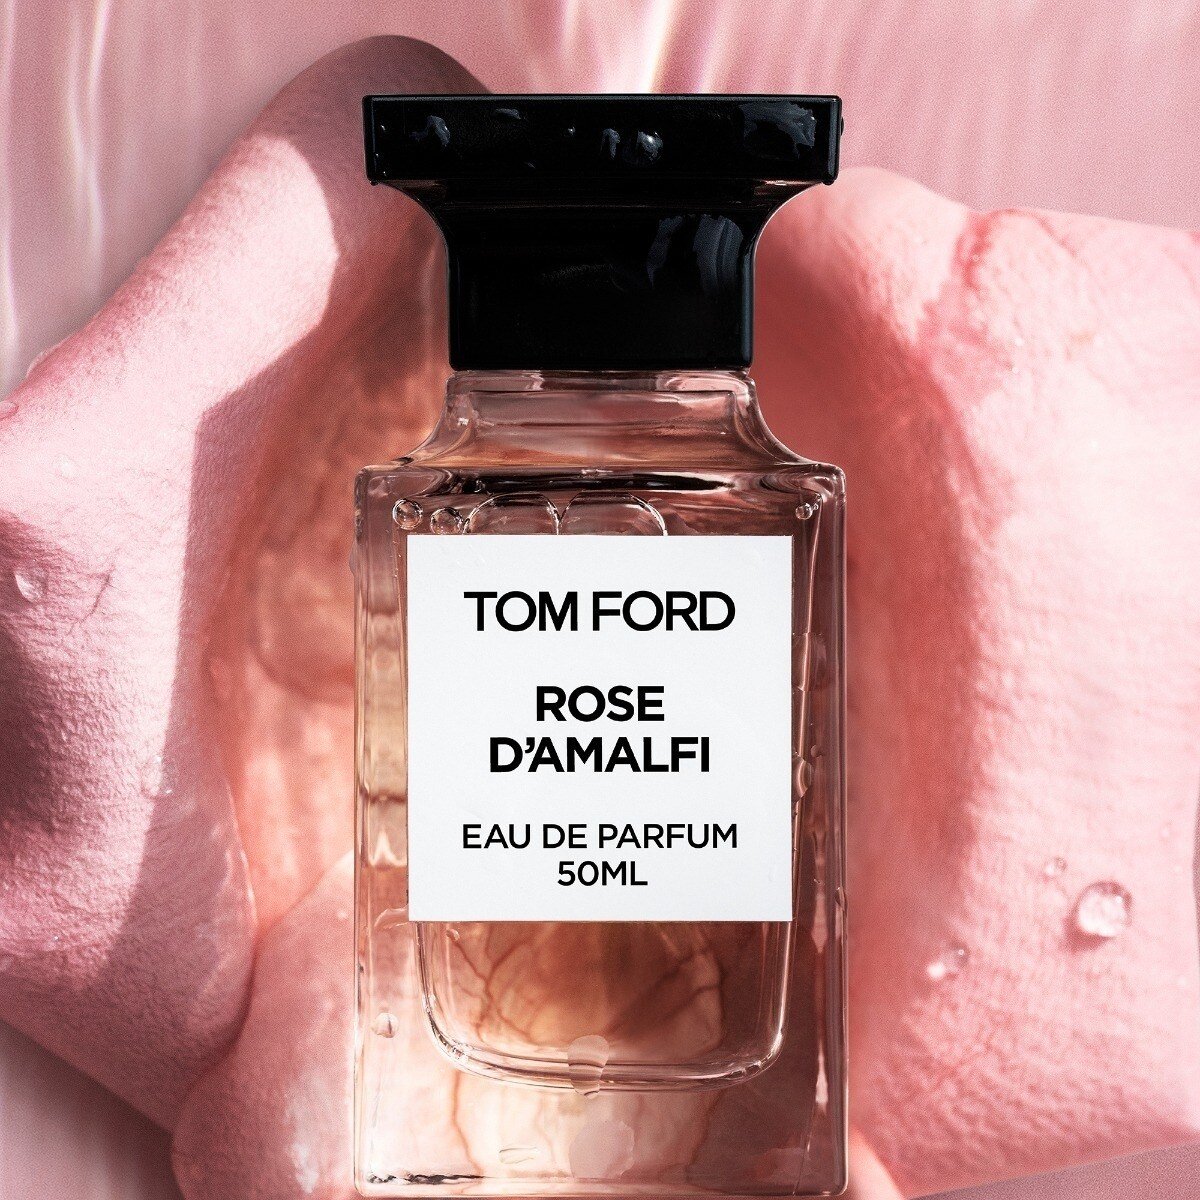 TOM FORD PRIVATE ROSE GARDEN INITIAL THOUGHTS